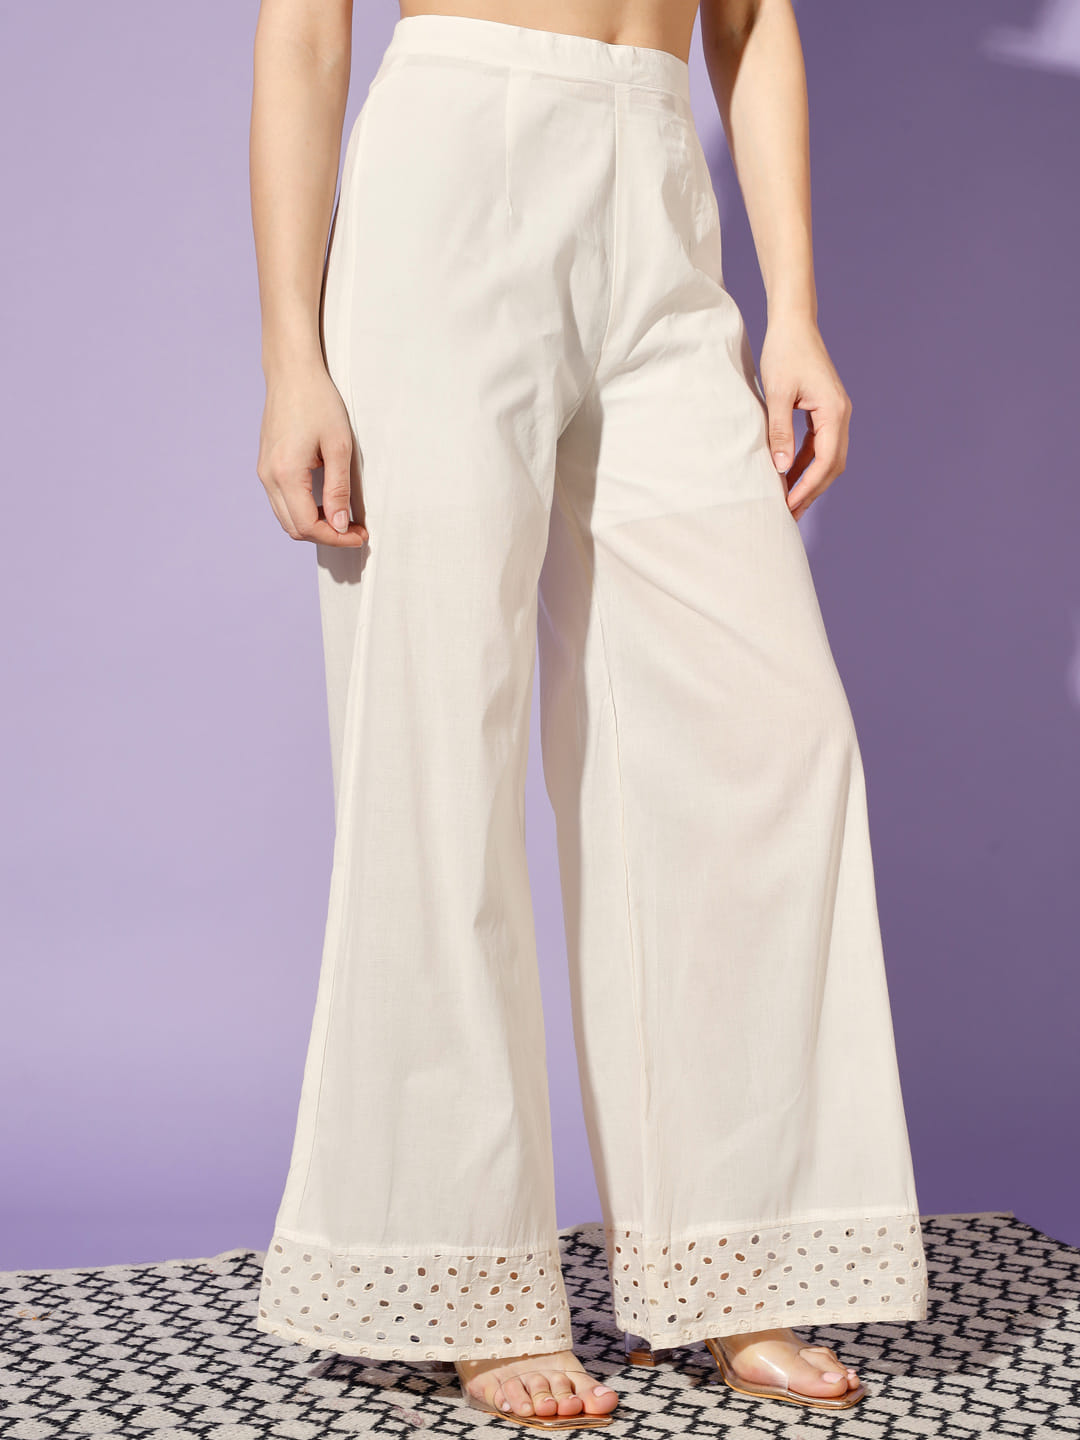 Happiness İstanbul Women's Cream Pleated Woven Trousers UB00188 - Trendyol